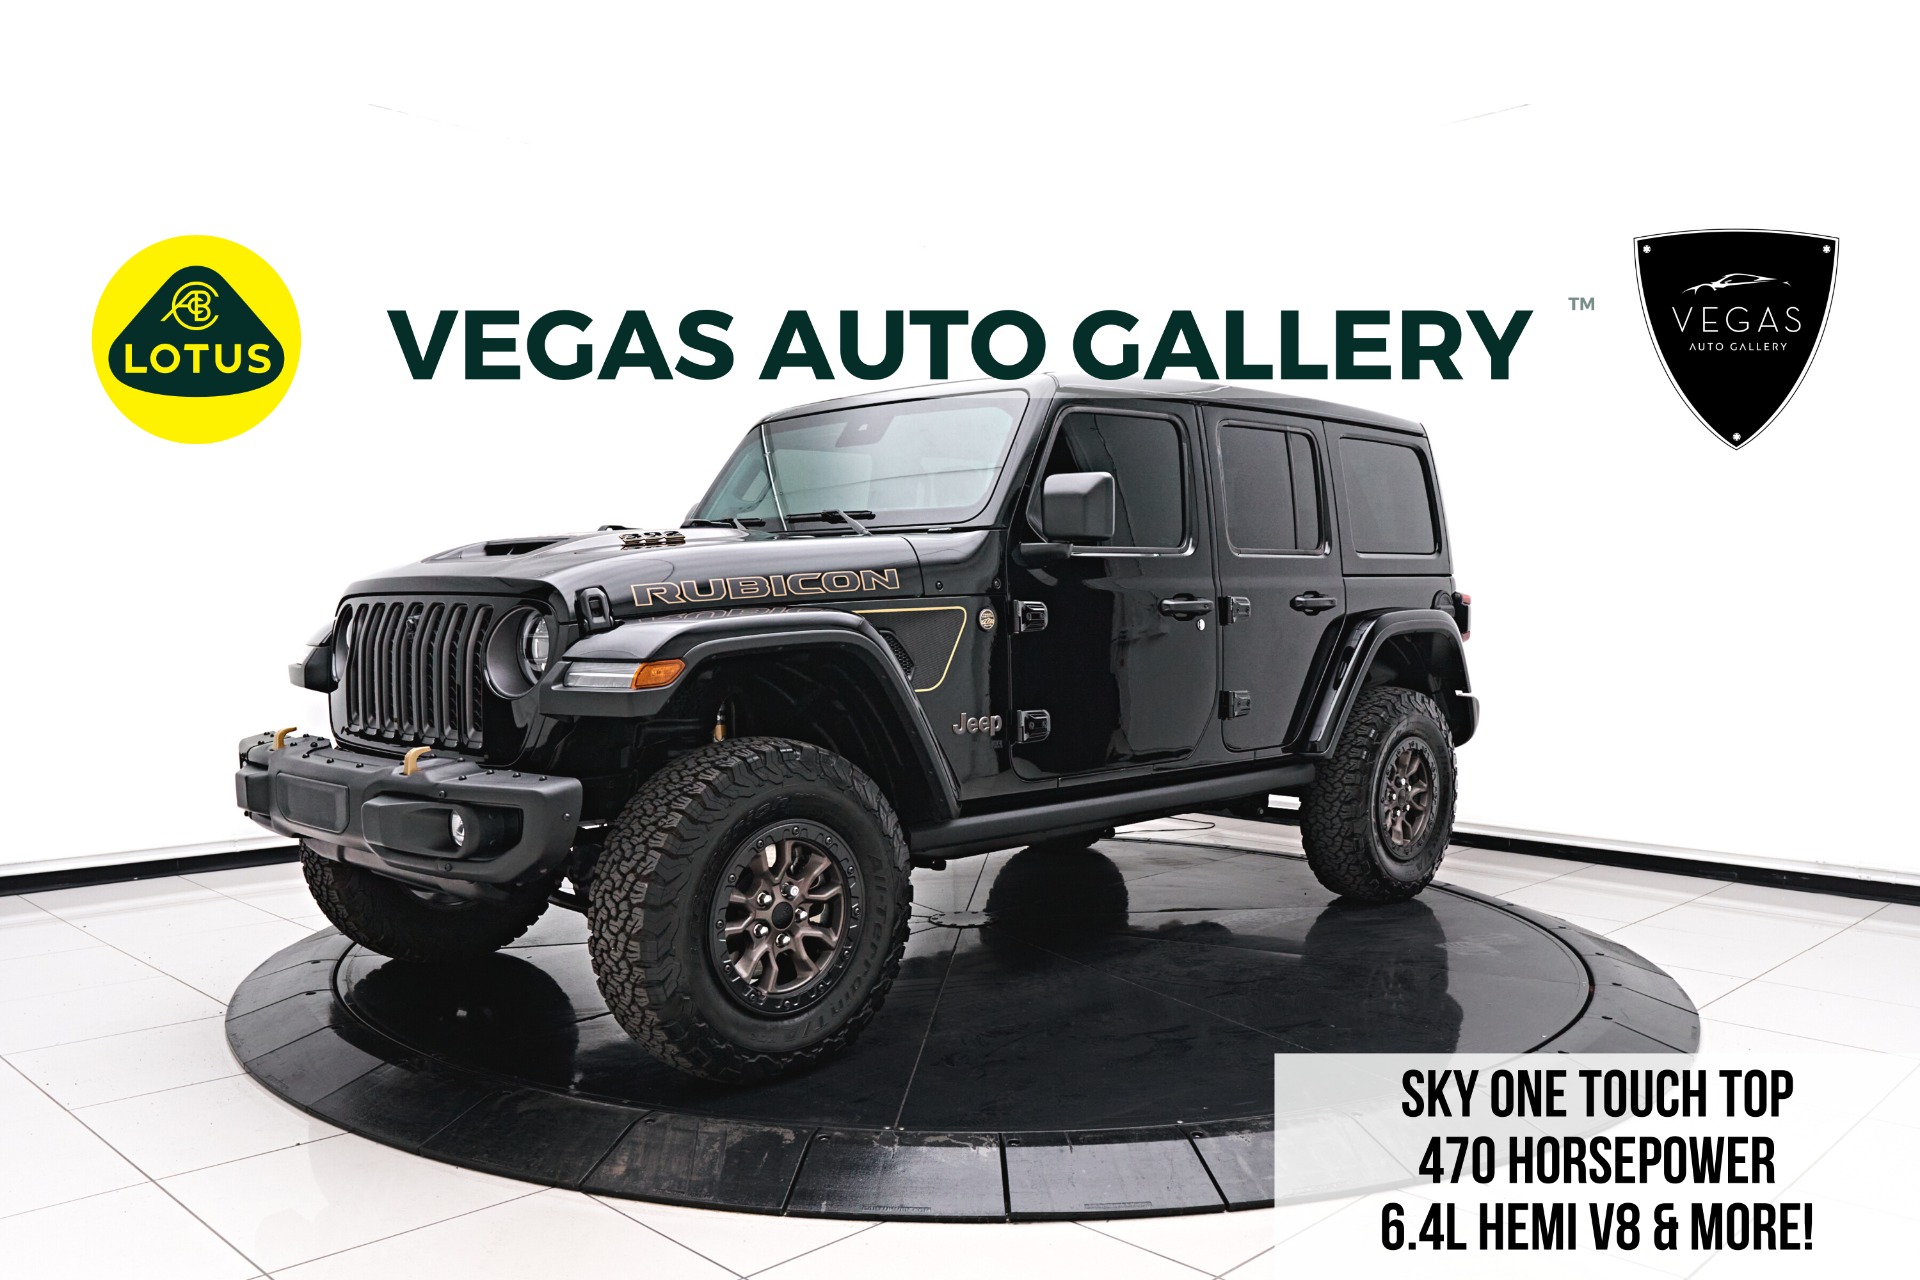 Used 2021 Jeep Wrangler Unlimited Rubicon 392 For Sale (Sold) | Lotus Cars  Las Vegas Stock #V8638901